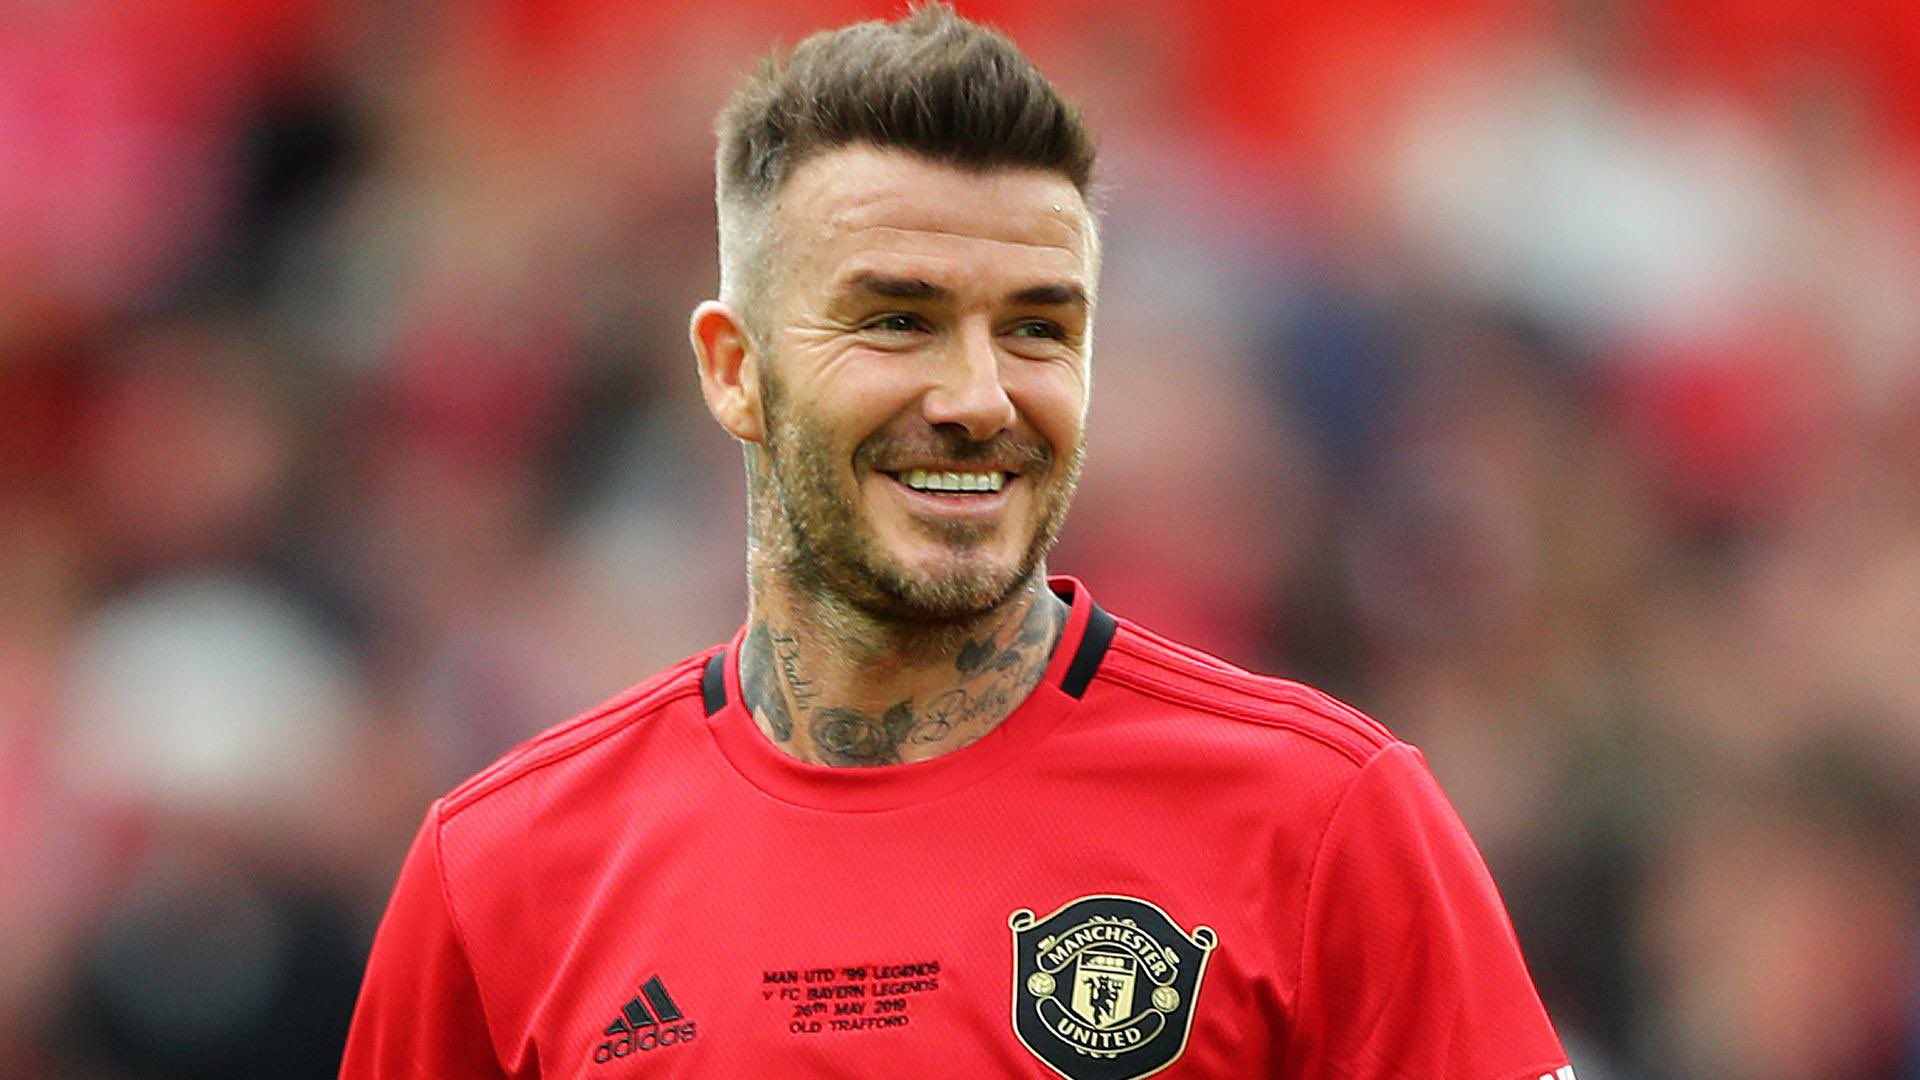 David Beckham insists Glazers must sell Man Utd as soon as possible ...